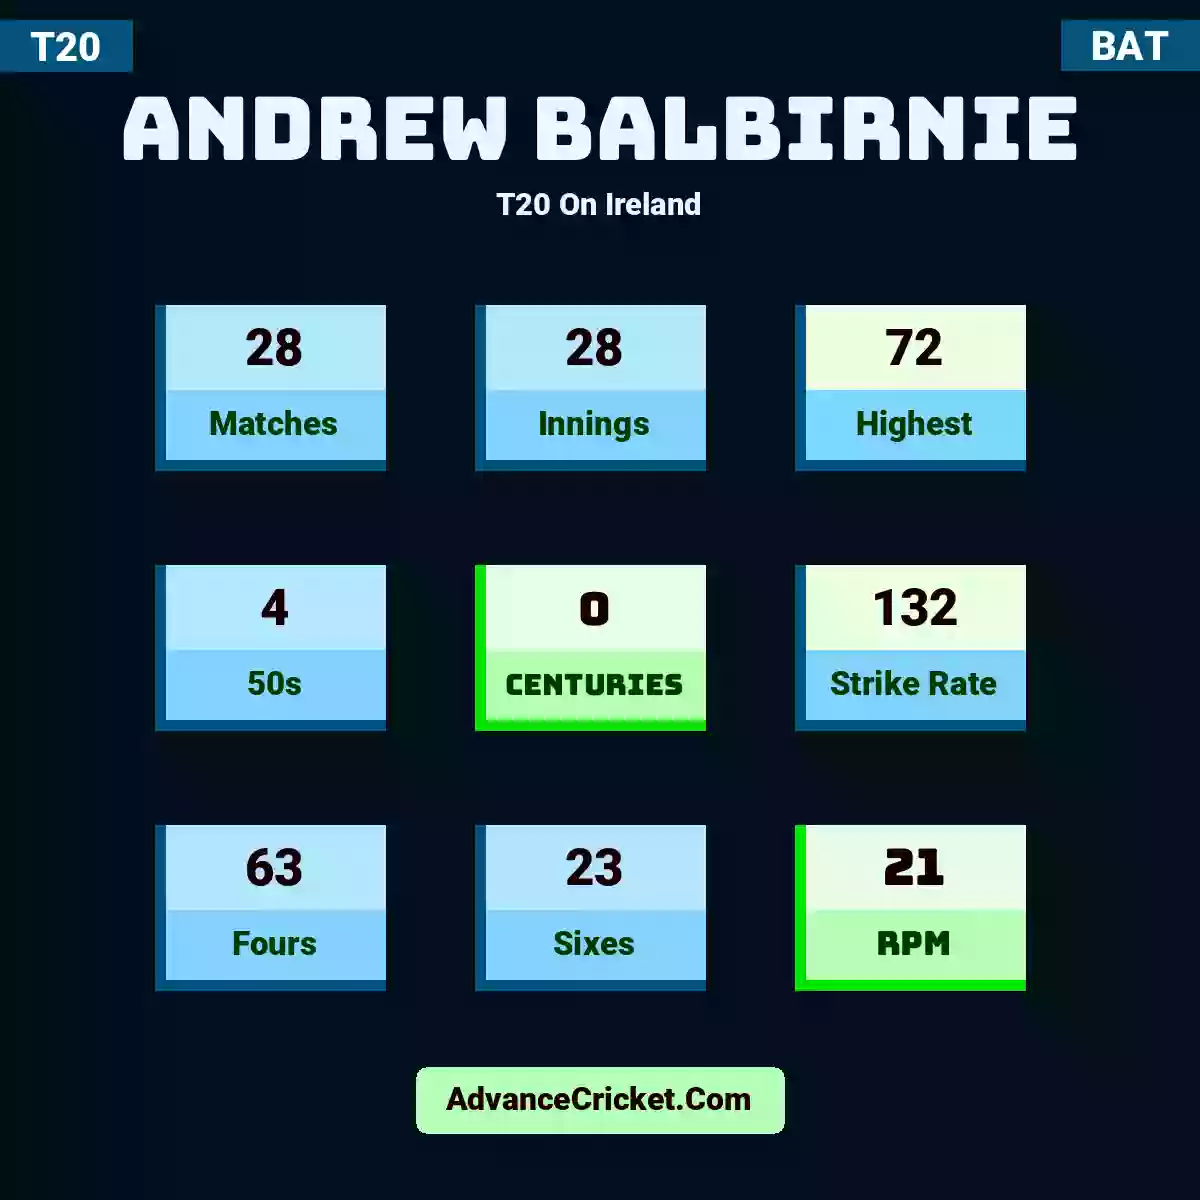 Andrew Balbirnie T20  On Ireland, Andrew Balbirnie played 28 matches, scored 72 runs as highest, 4 half-centuries, and 0 centuries, with a strike rate of 132. A.Balbirnie hit 63 fours and 23 sixes, with an RPM of 21.